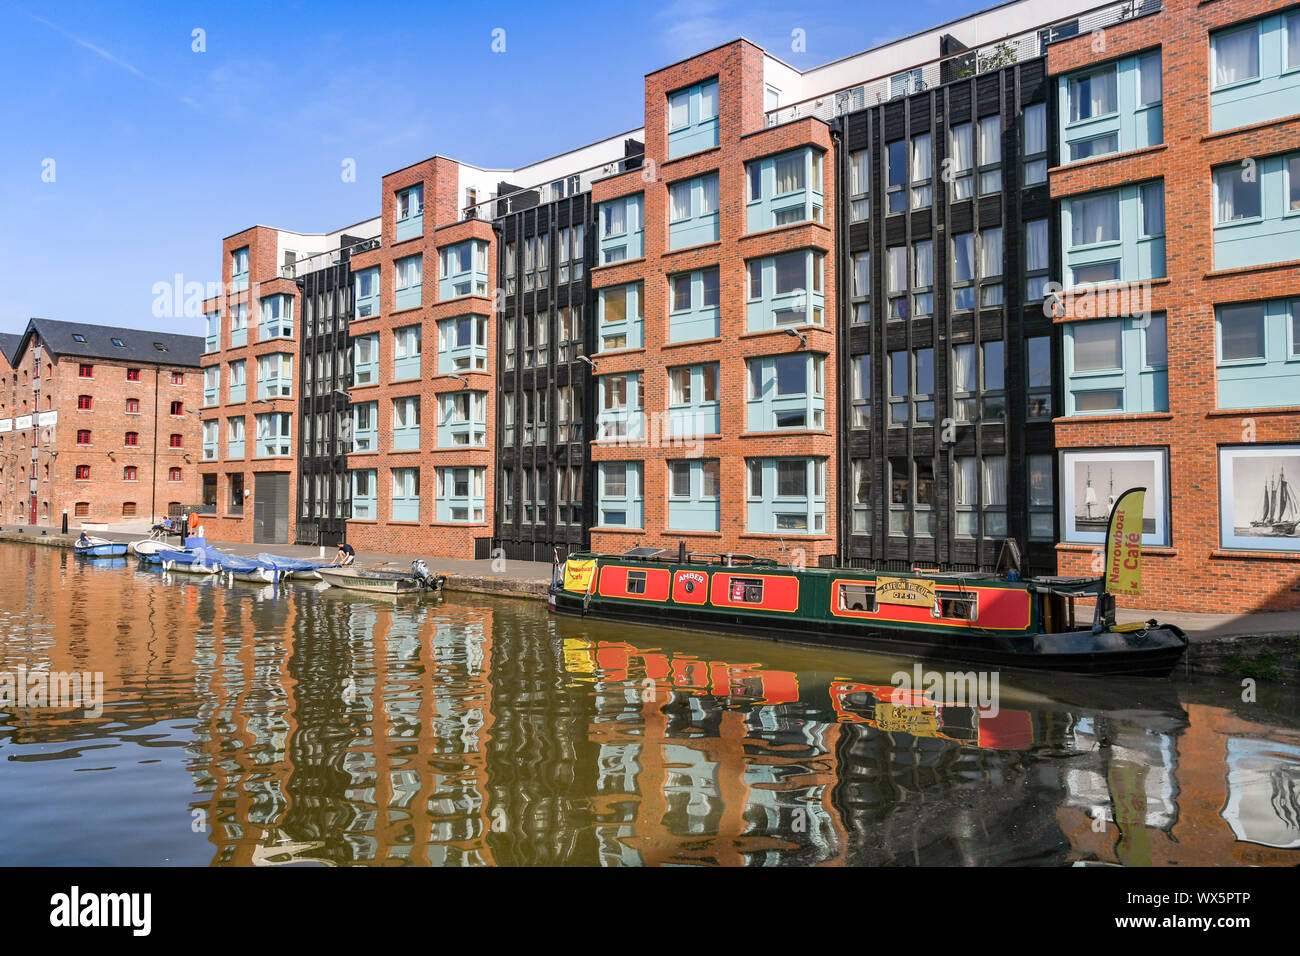 GLOUCESTER QUAYS, Inghilterra - Settembre 2019: Waterside apartments in rigenerata ex docks in Gloucester Quays. Foto Stock